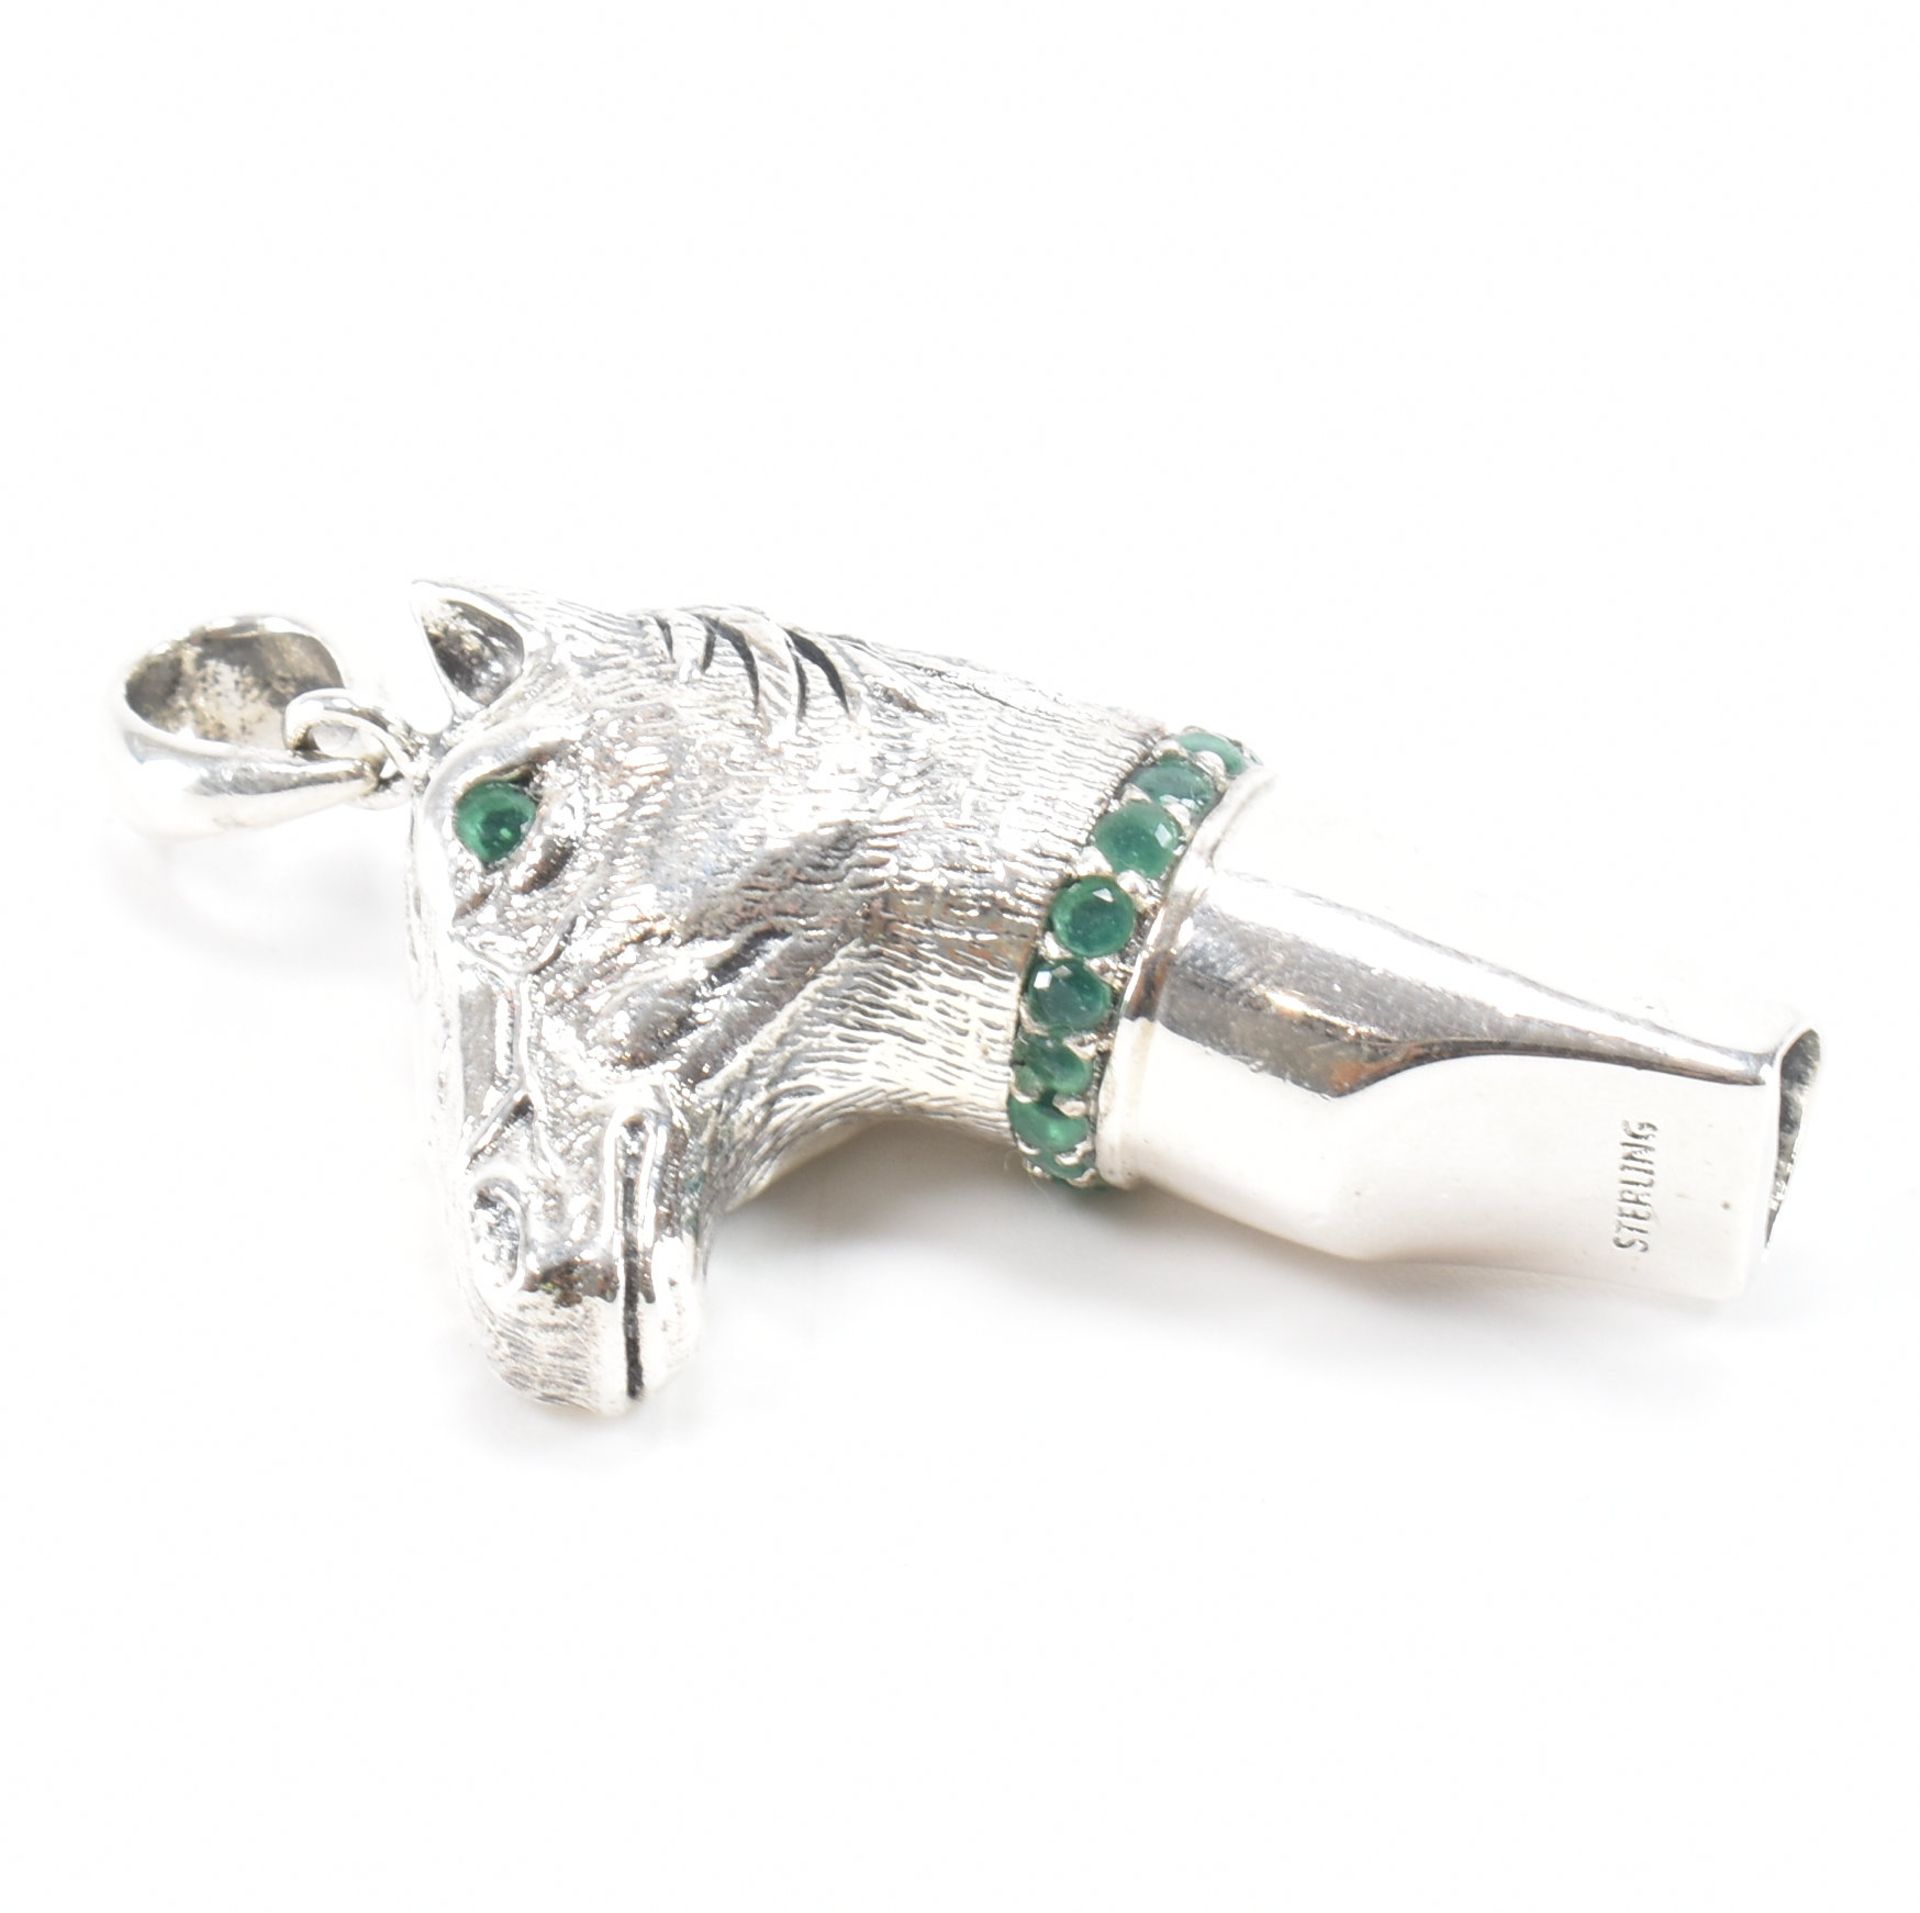 STERLING SILVER HORSES HEAD WHISTLE WITH GREEN STONE DETAILING